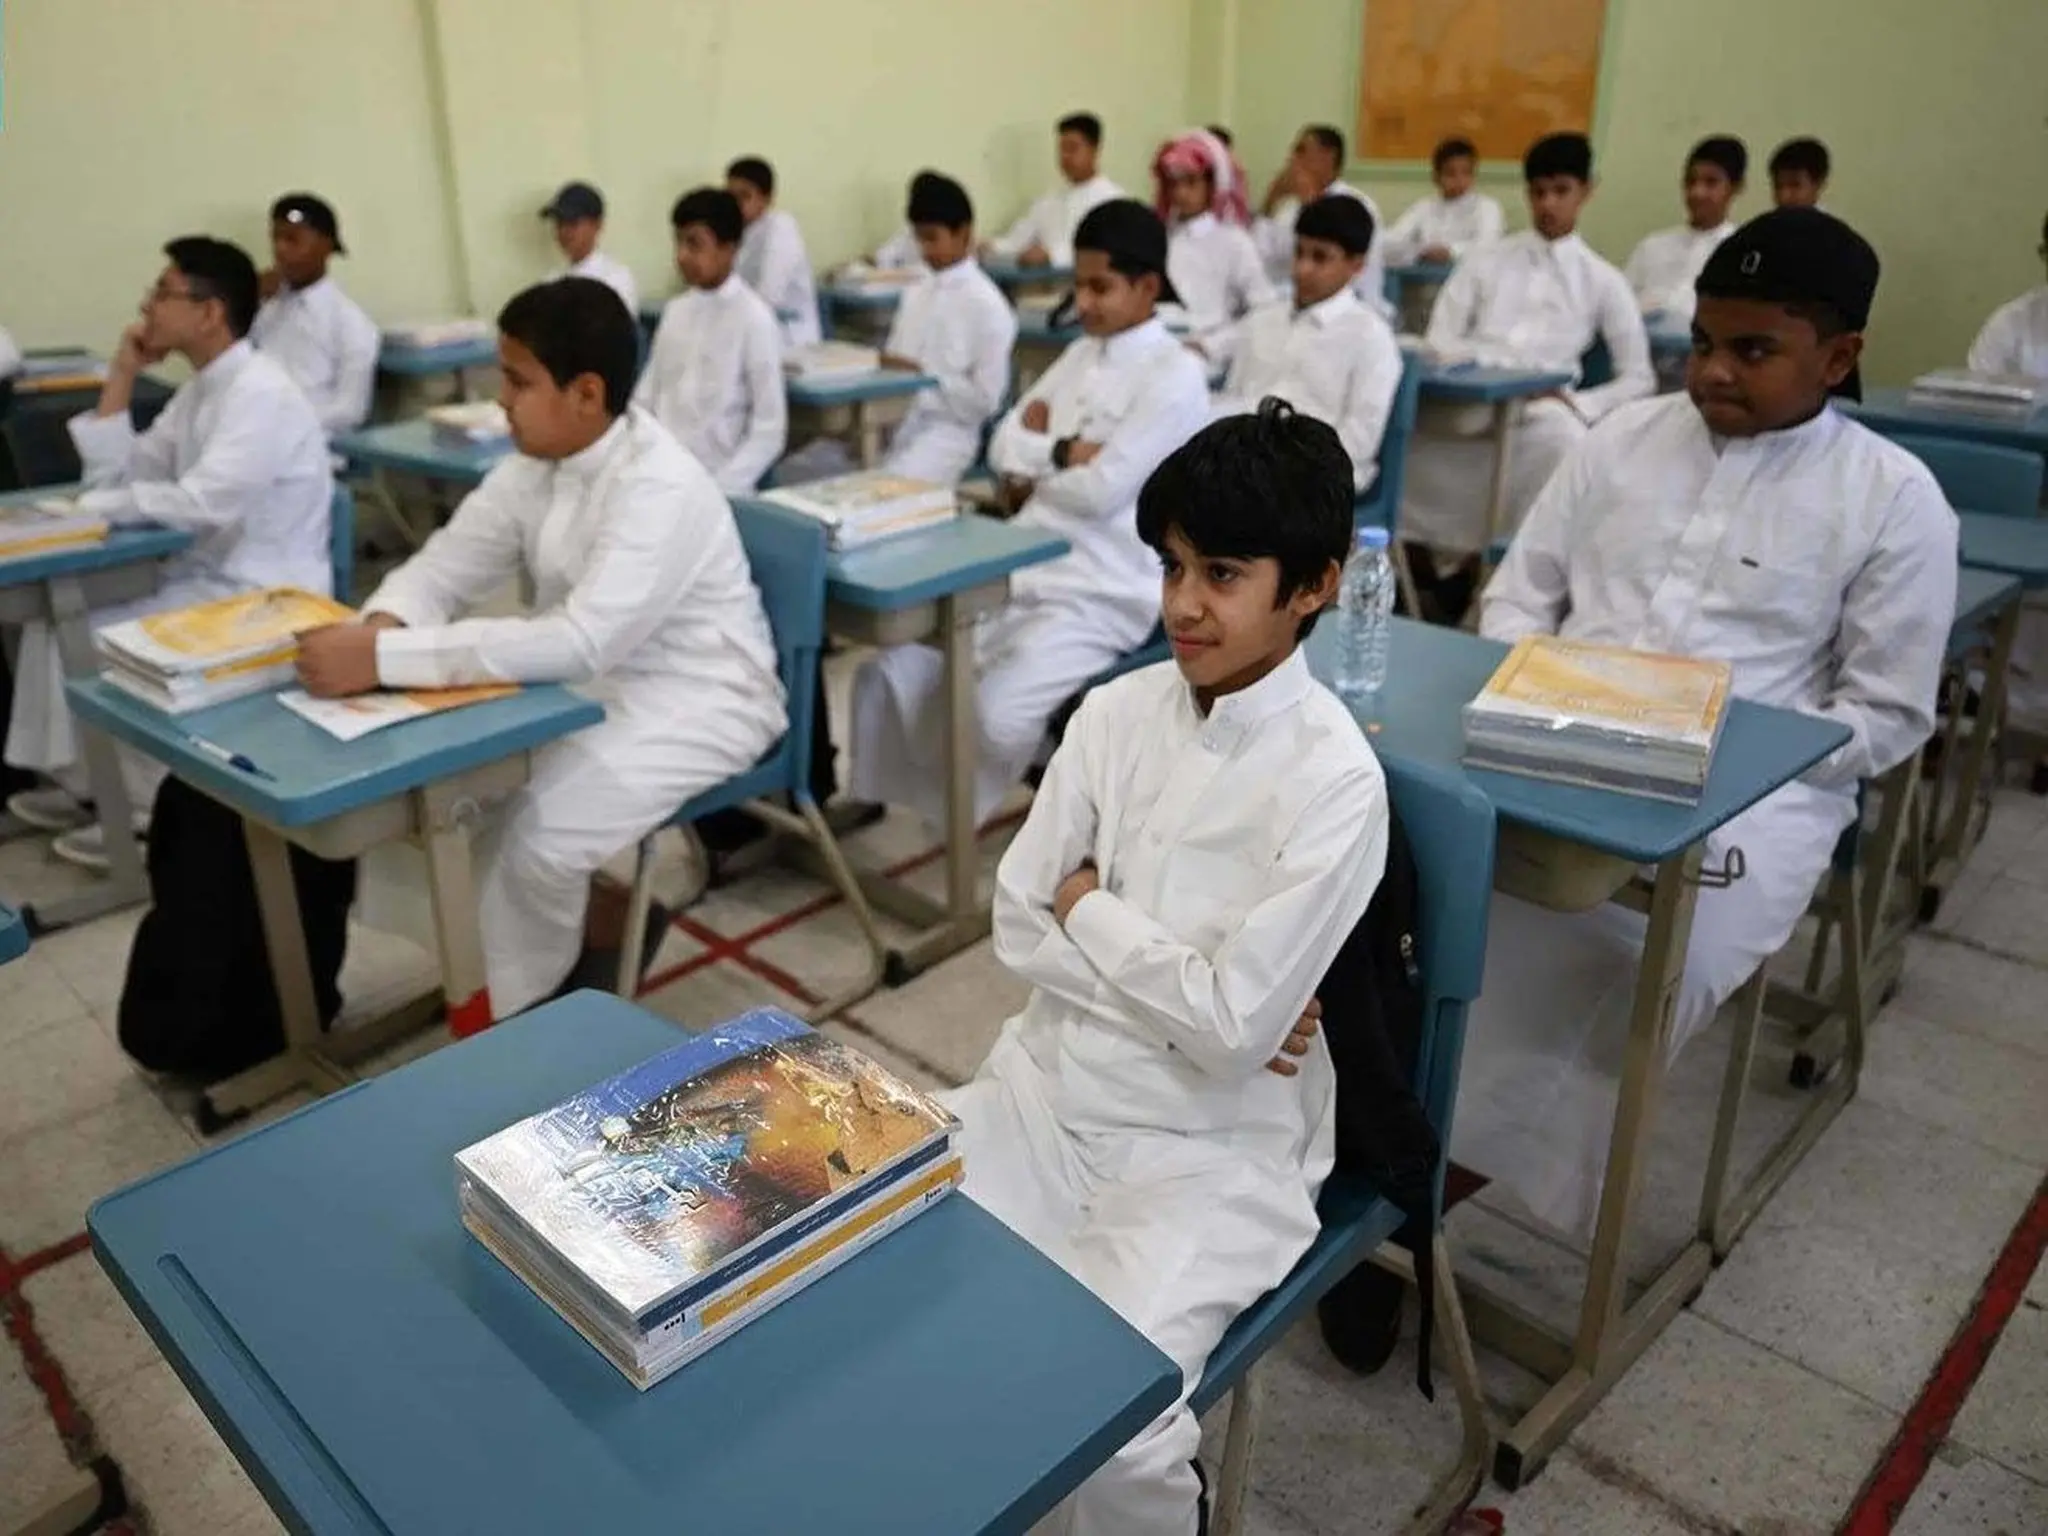 Prices of private lessons in UAE are declining as exams approach 